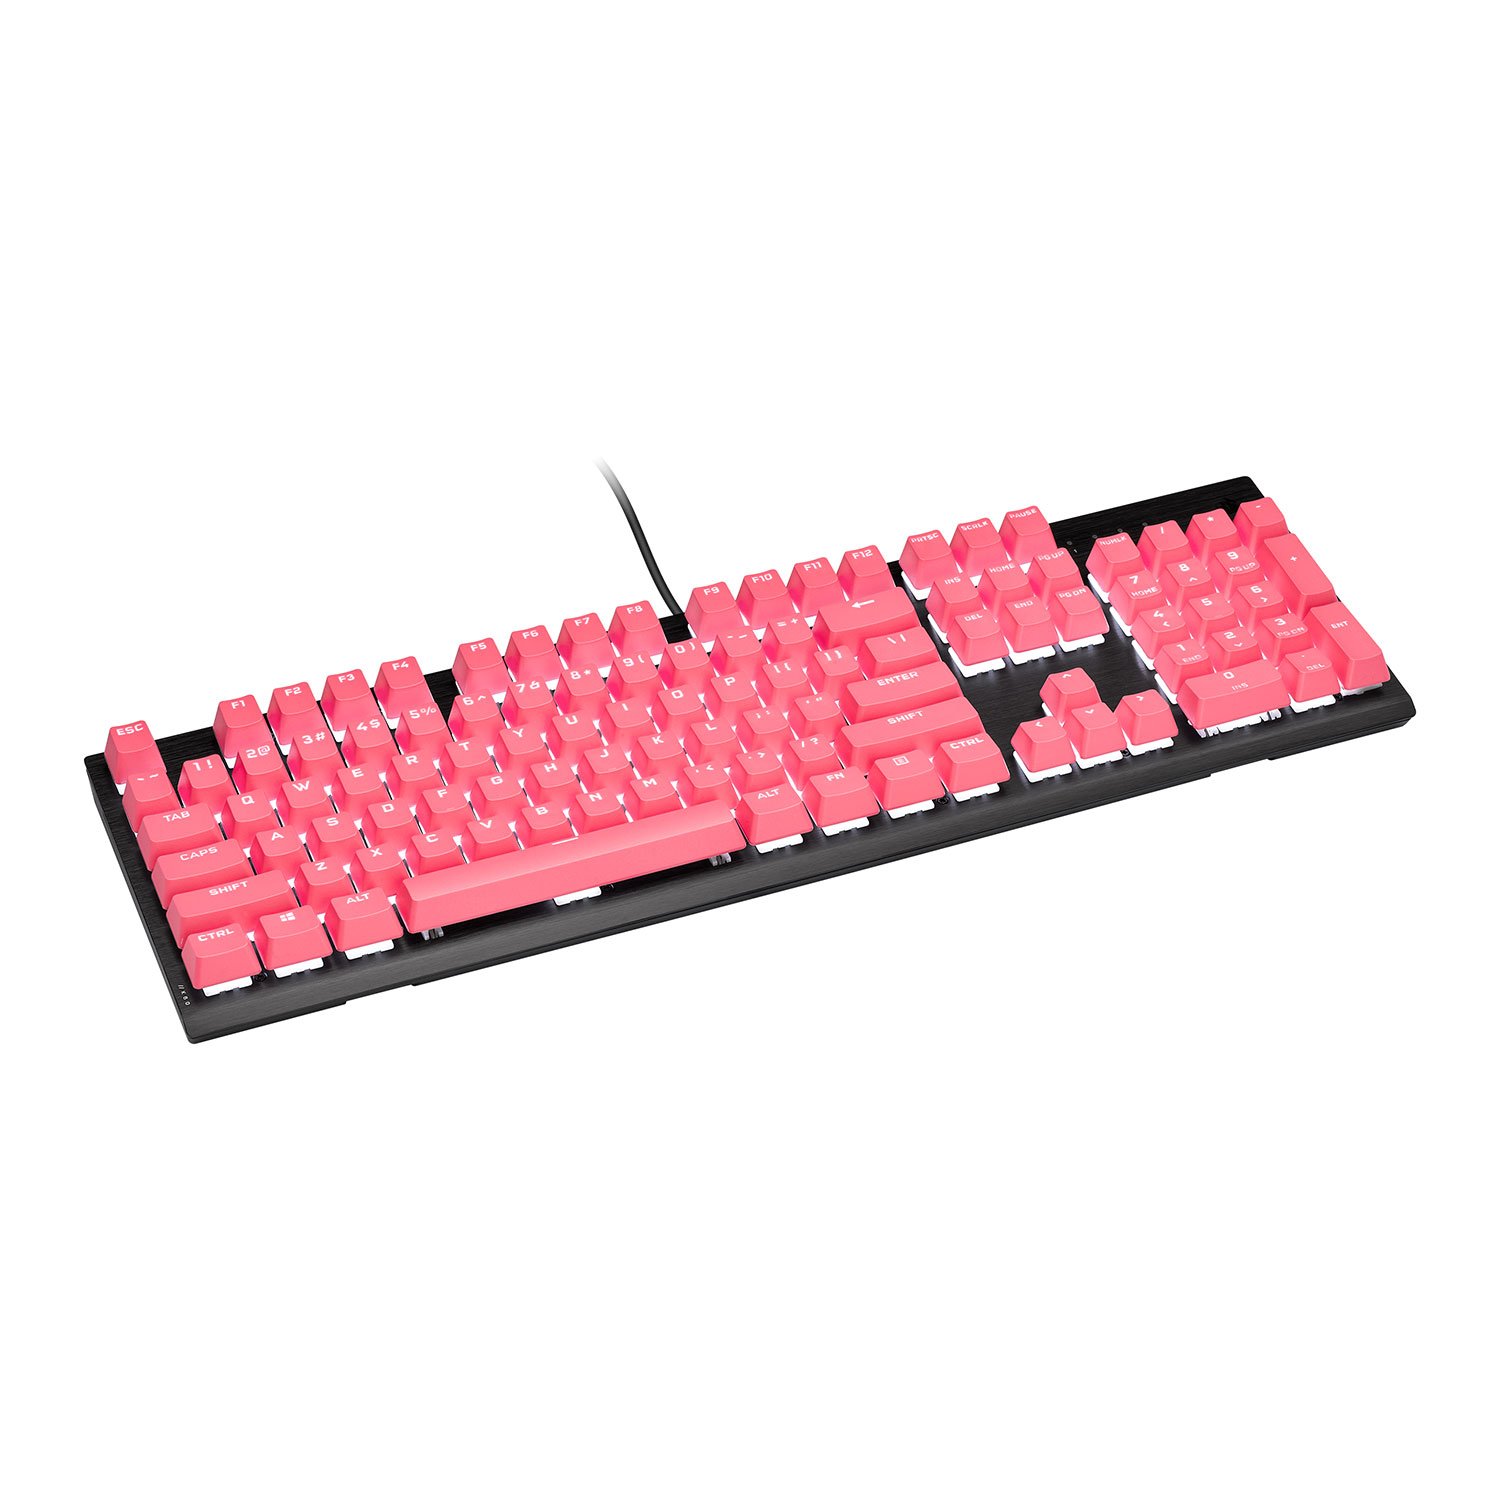 Corsair Ch-9911070-Na Pbt Double-Shot Pro Keycap Mod Kit – Rogue Pink – Heavy-Duty Pbt Plastic With Textured Surface Thick 1.5mm Double-Shot Walls With Backlit Font O-Ring Dampeners Included For Quieter Keystrokes 104 Backlit Keys With Puller